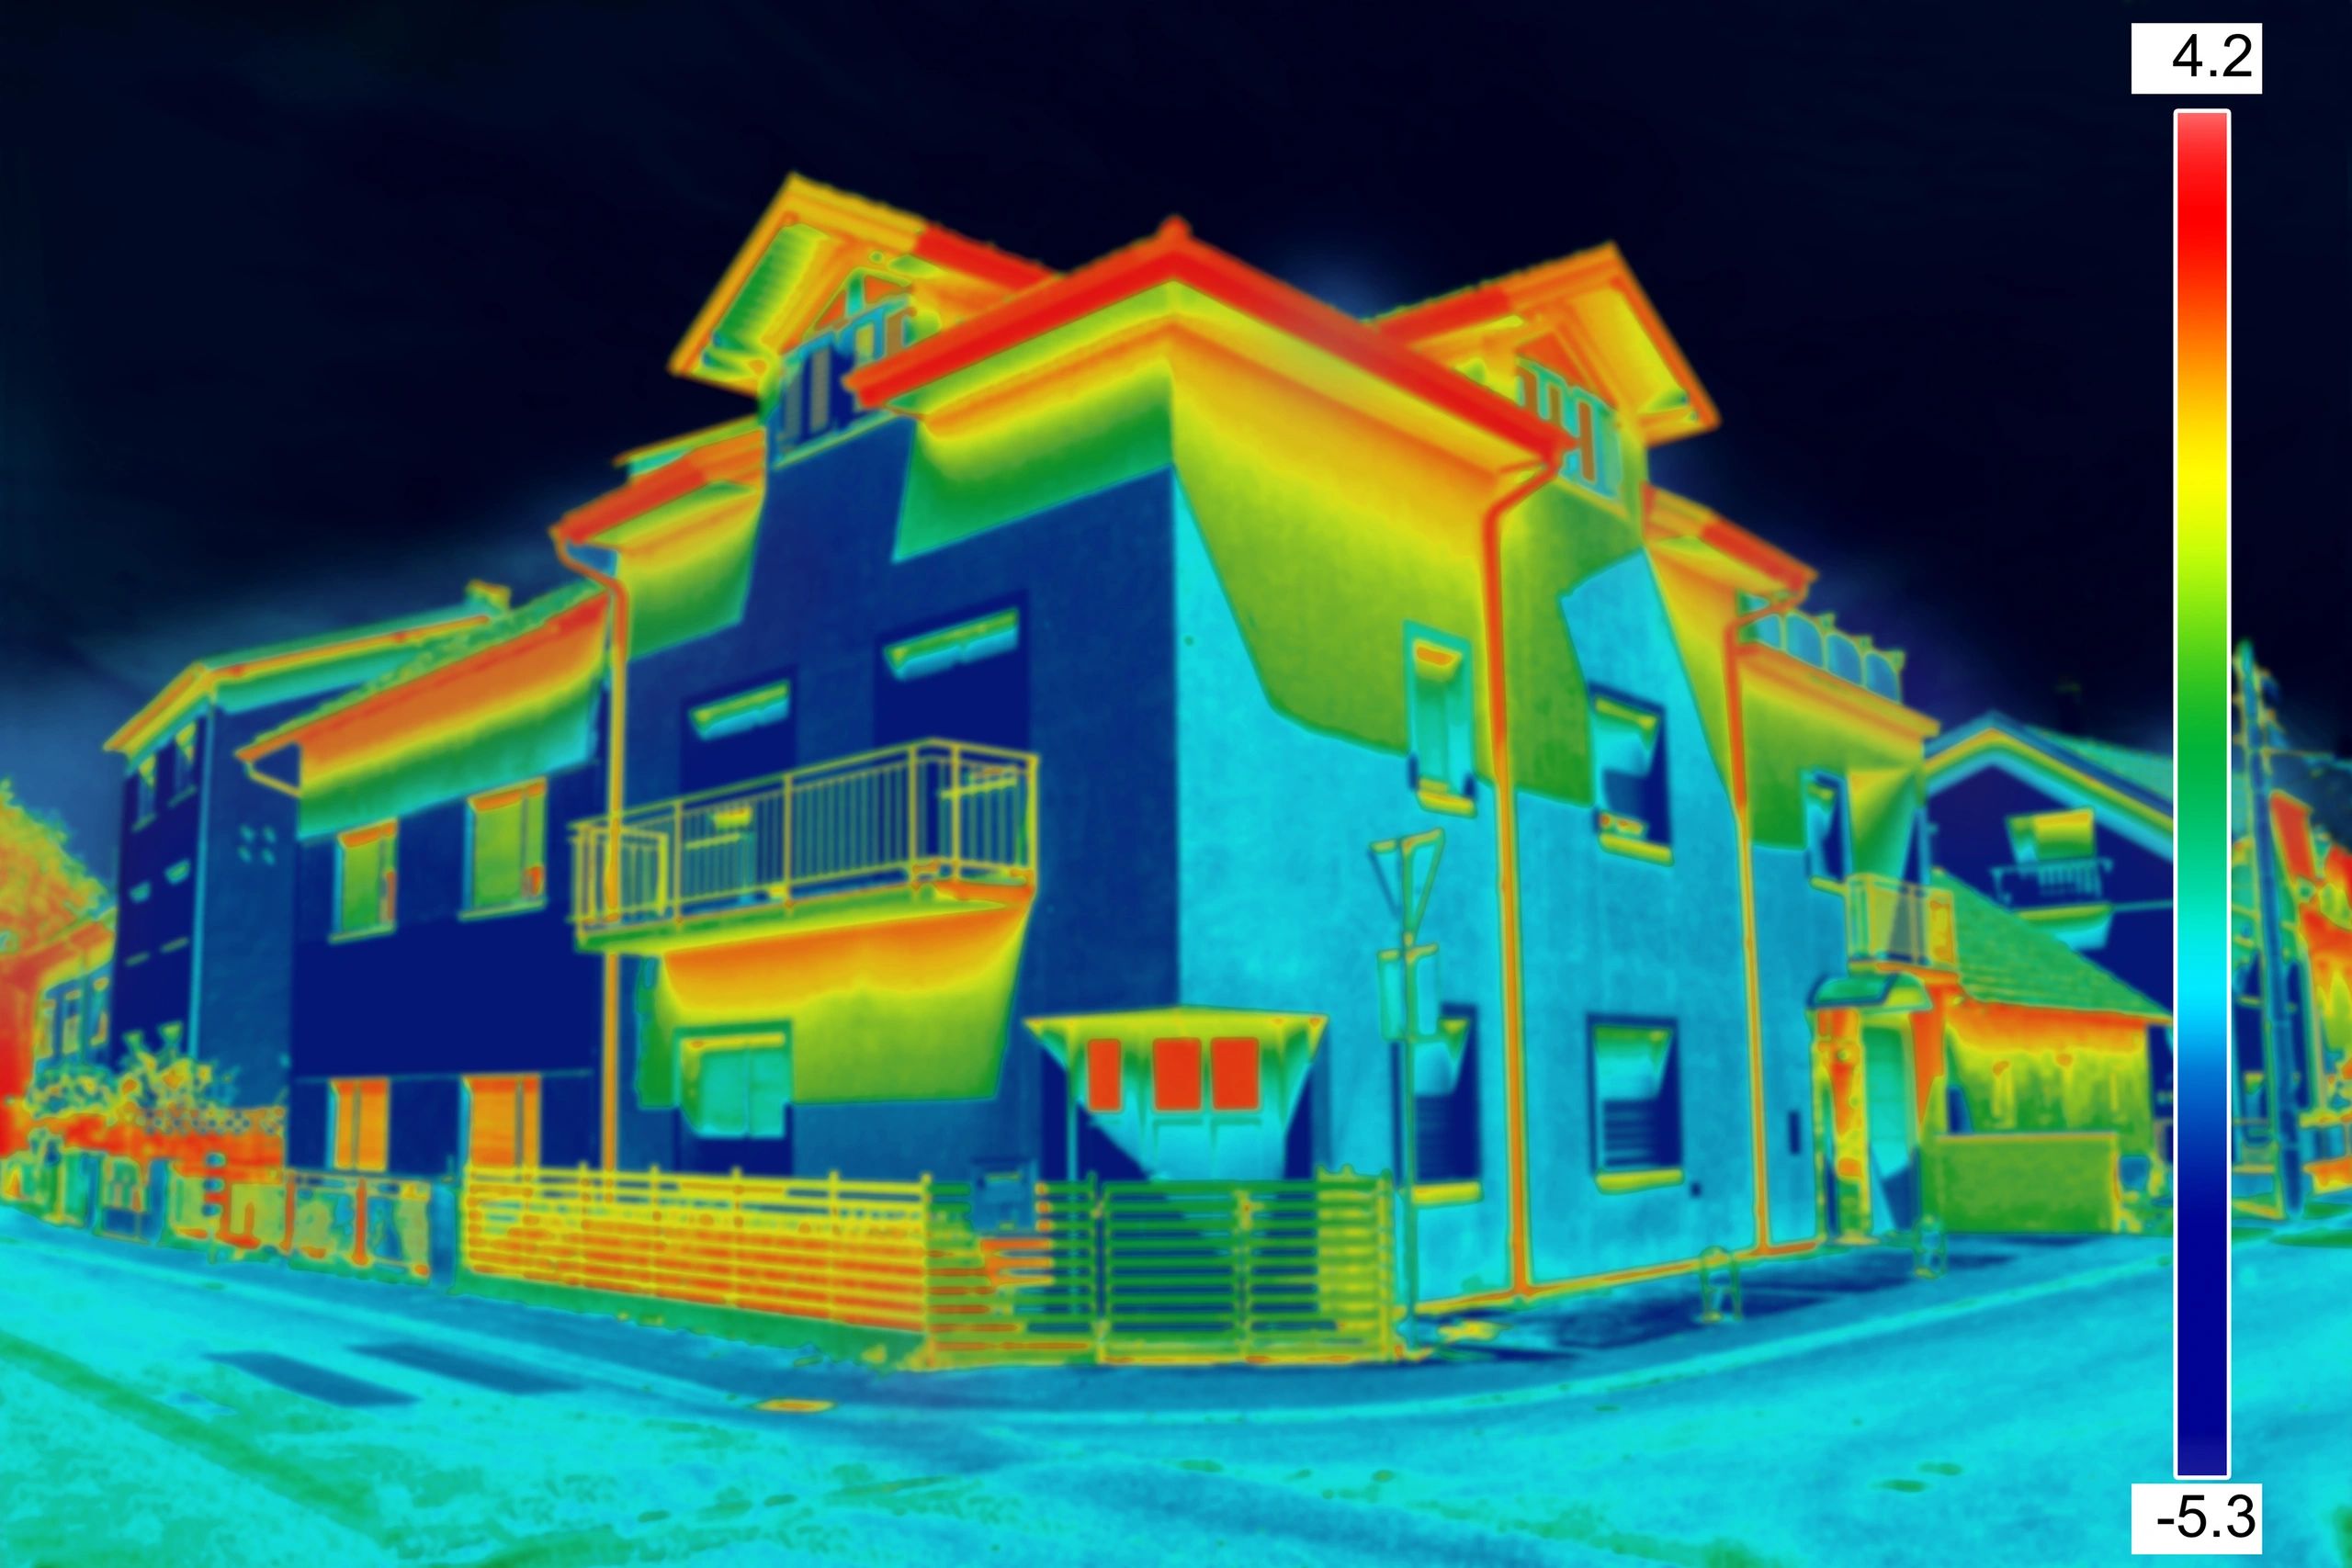 Thermal image of a house.